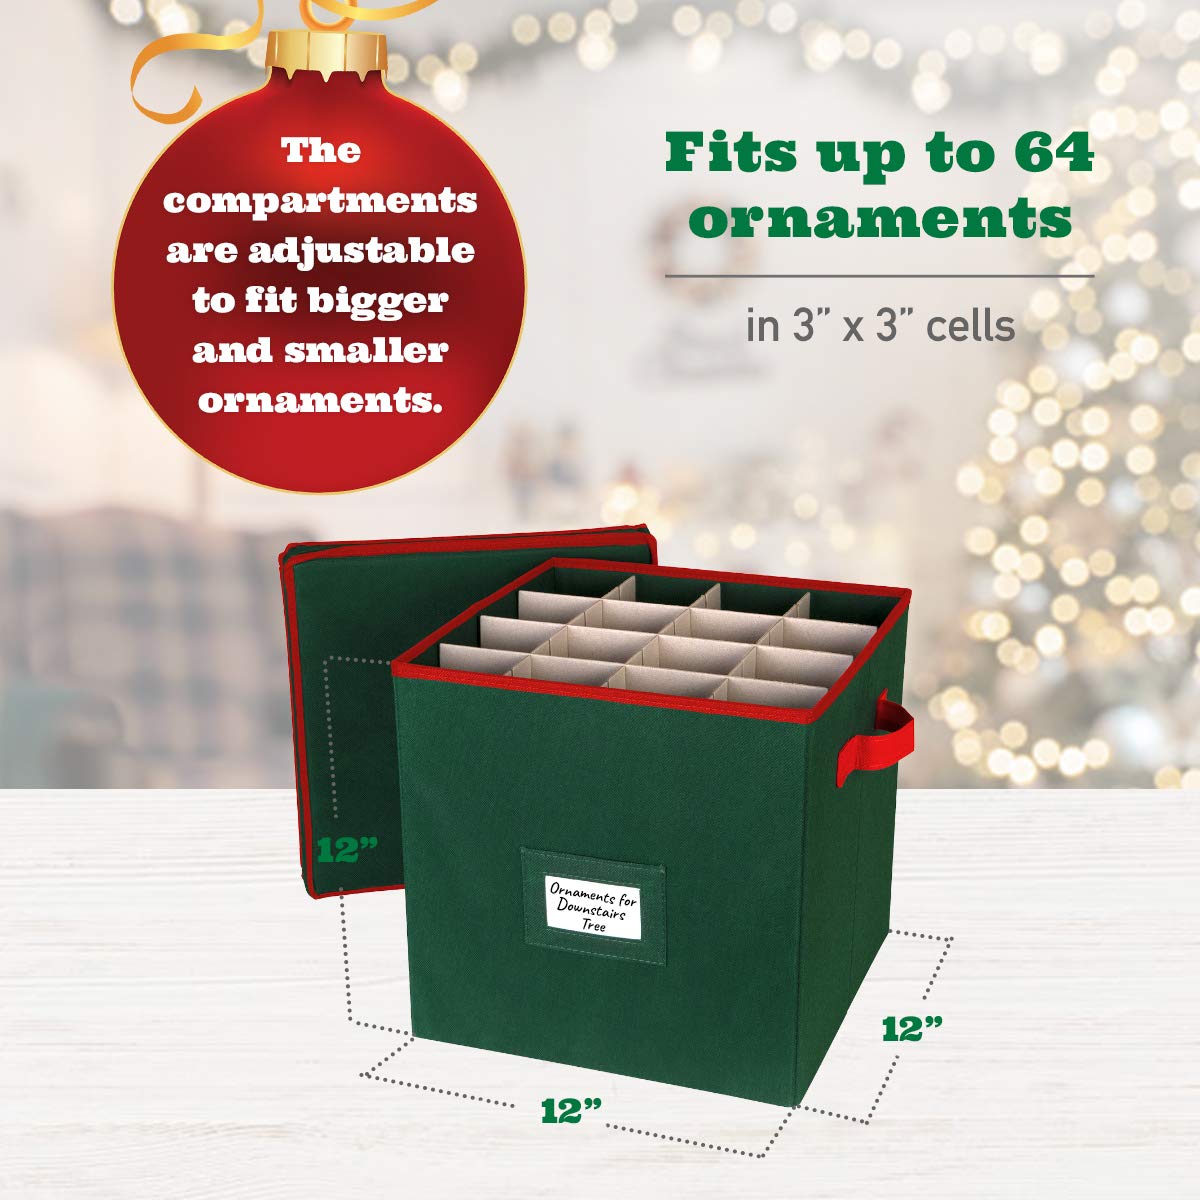 HOLDN’ STORAGE Christmas Ornament Storage Box with Lid - Christmas Decor Storage Containers that Store up to 64 Holiday Ornaments - Green  - Like New